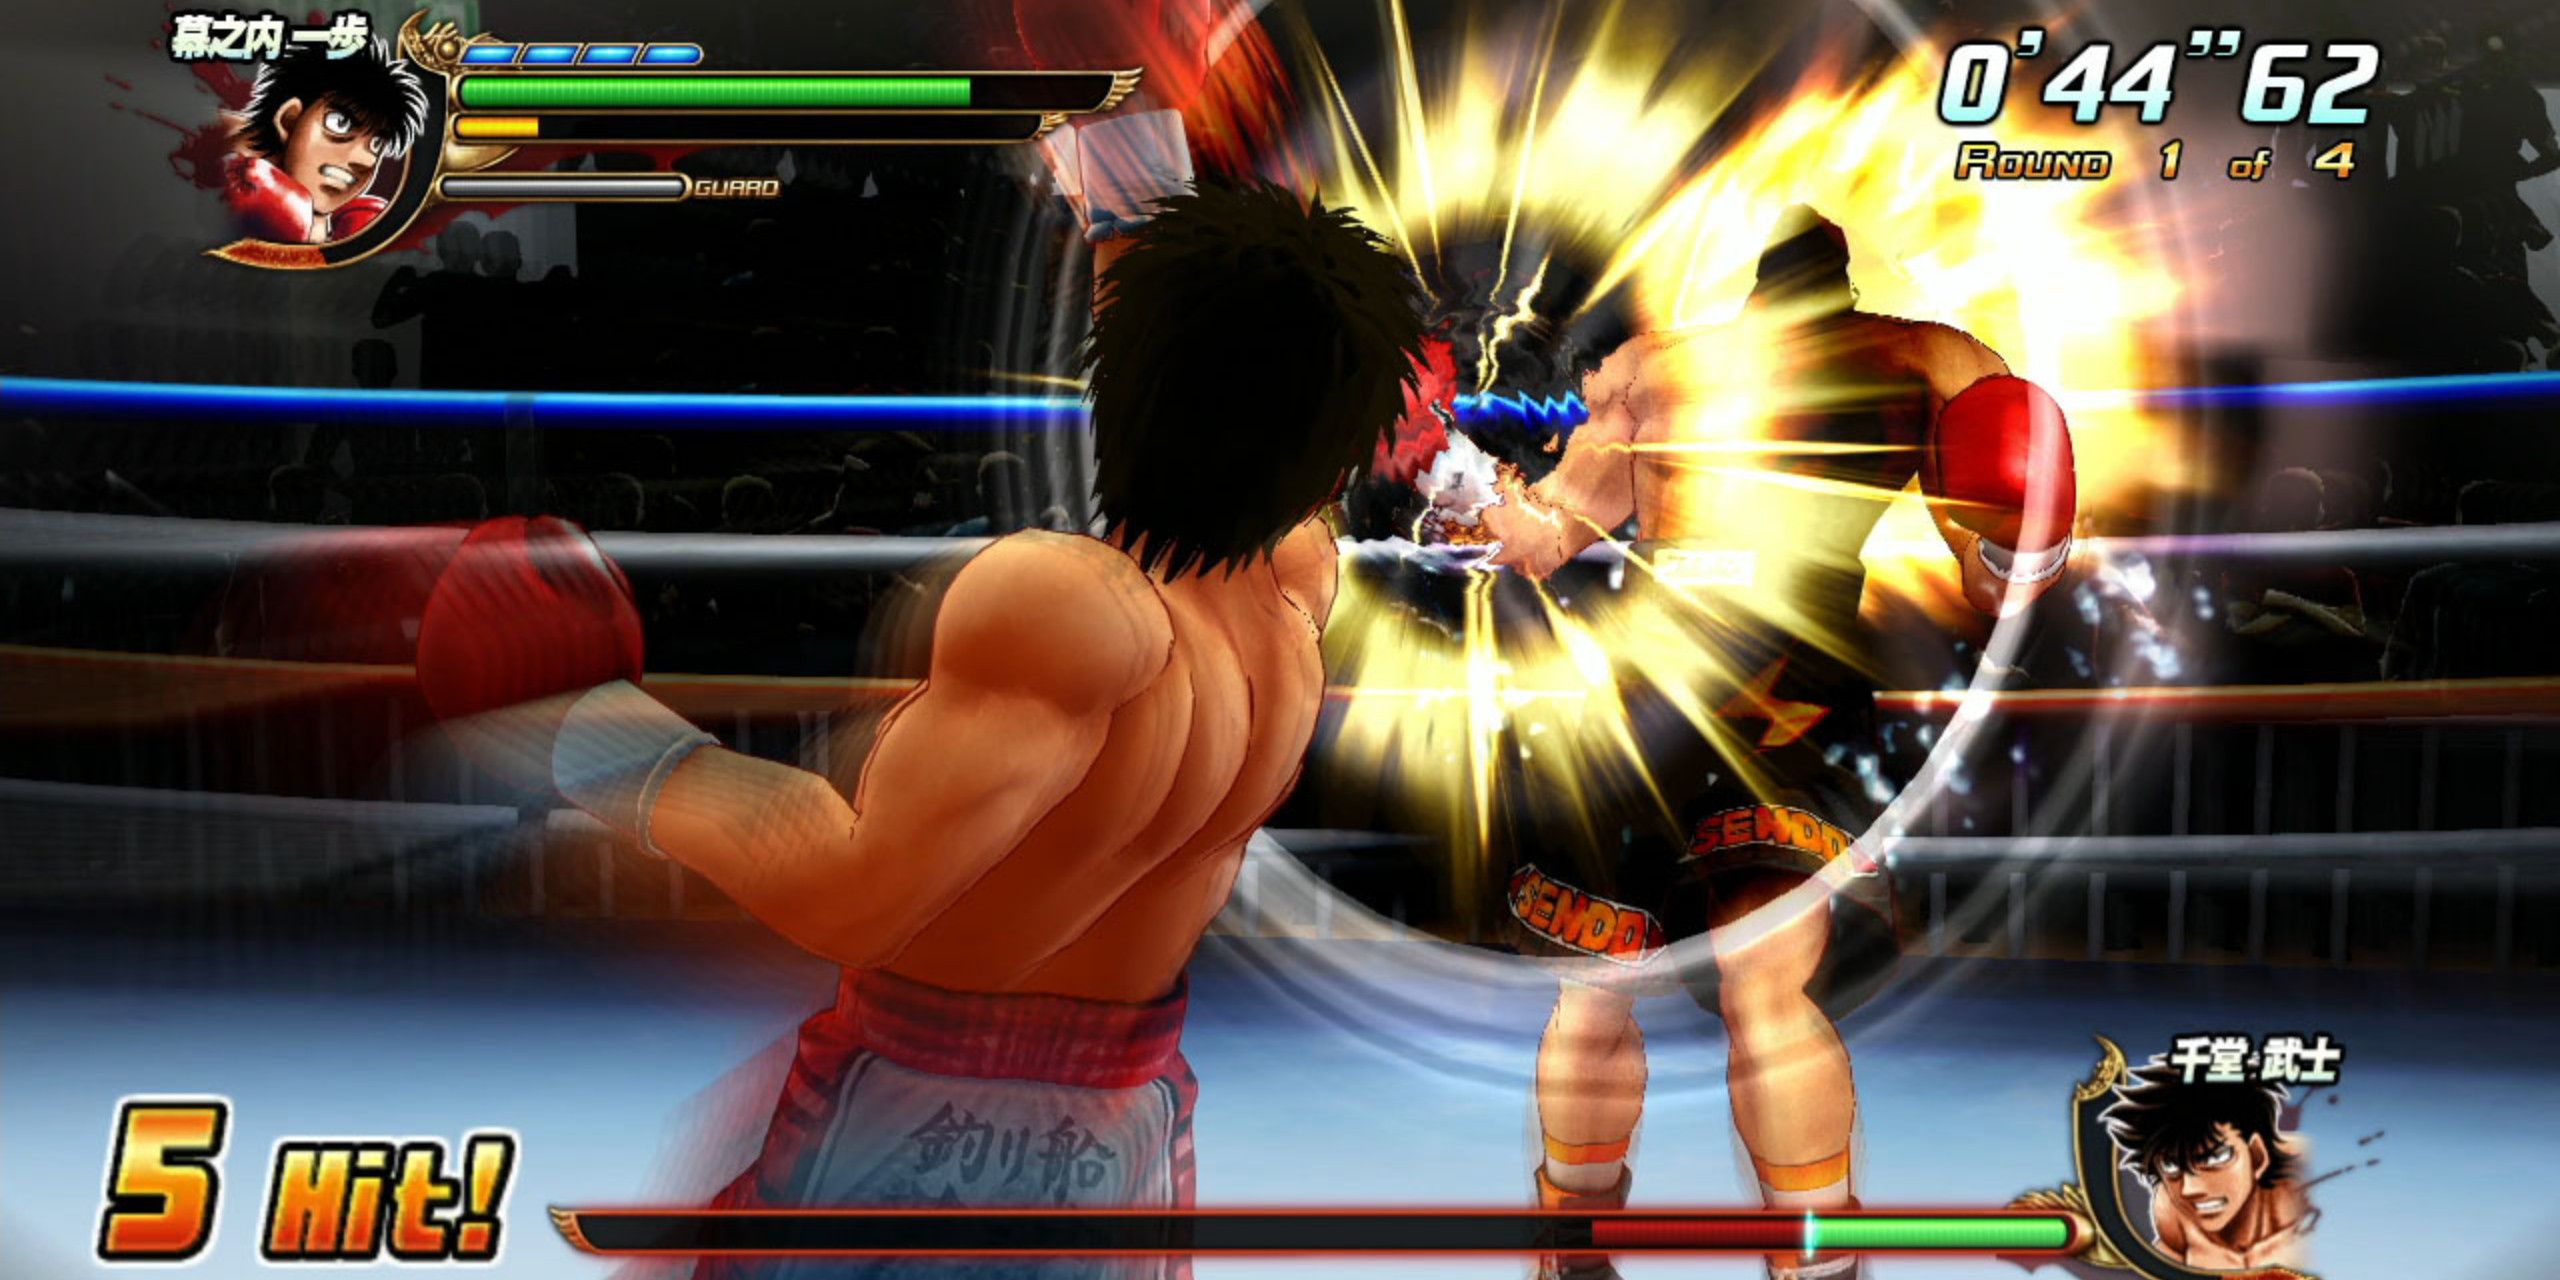 Ippo fighting against an opponent in a boxing ring